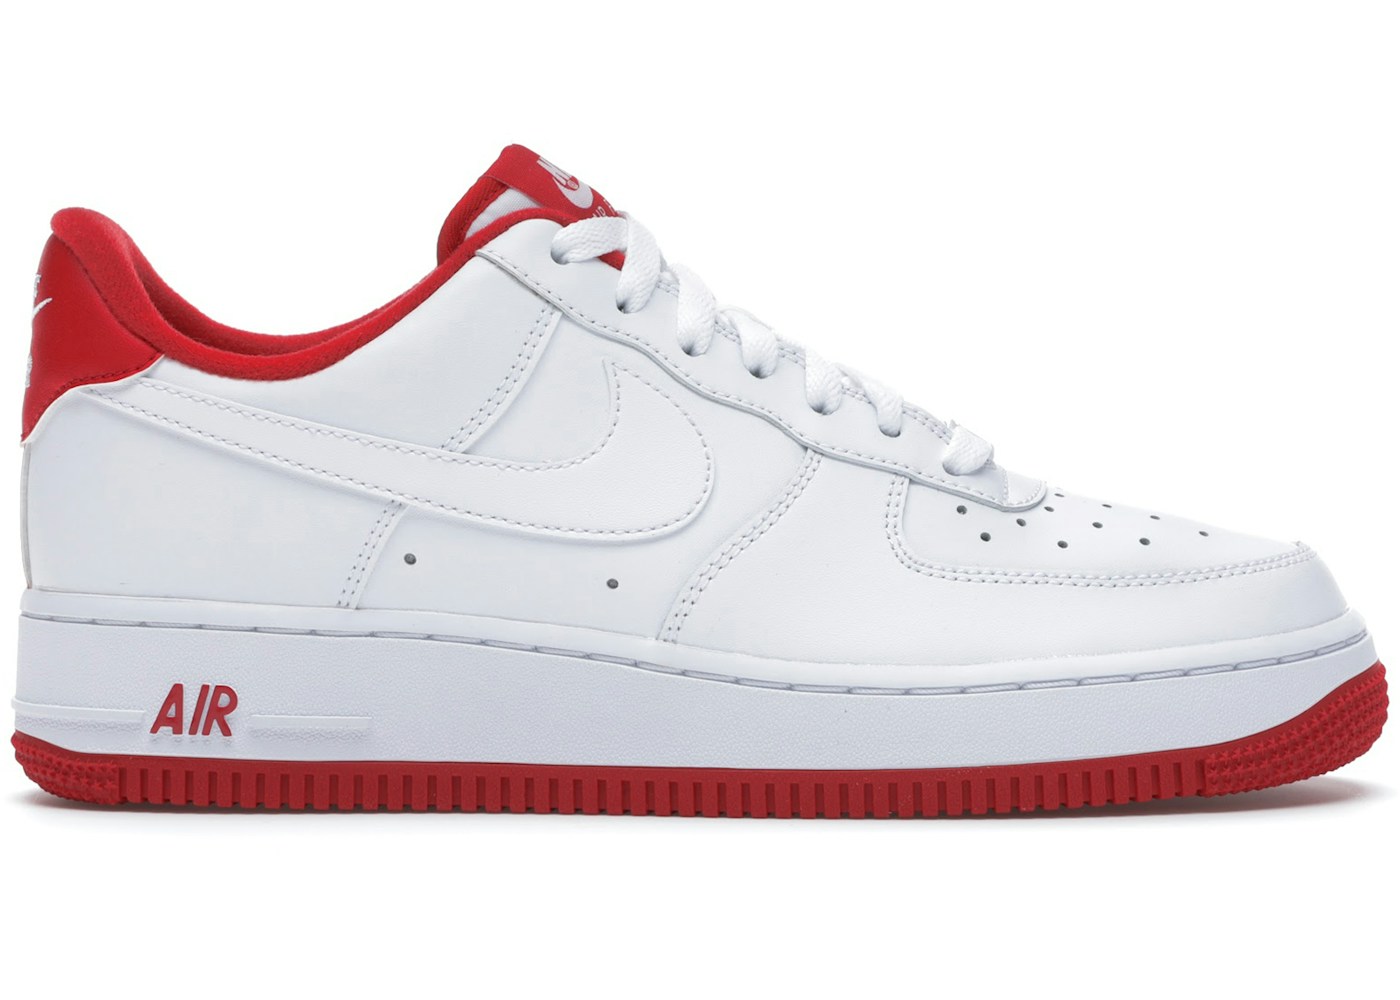 Nike Air Force 1 Low White University Red - CD0884-101